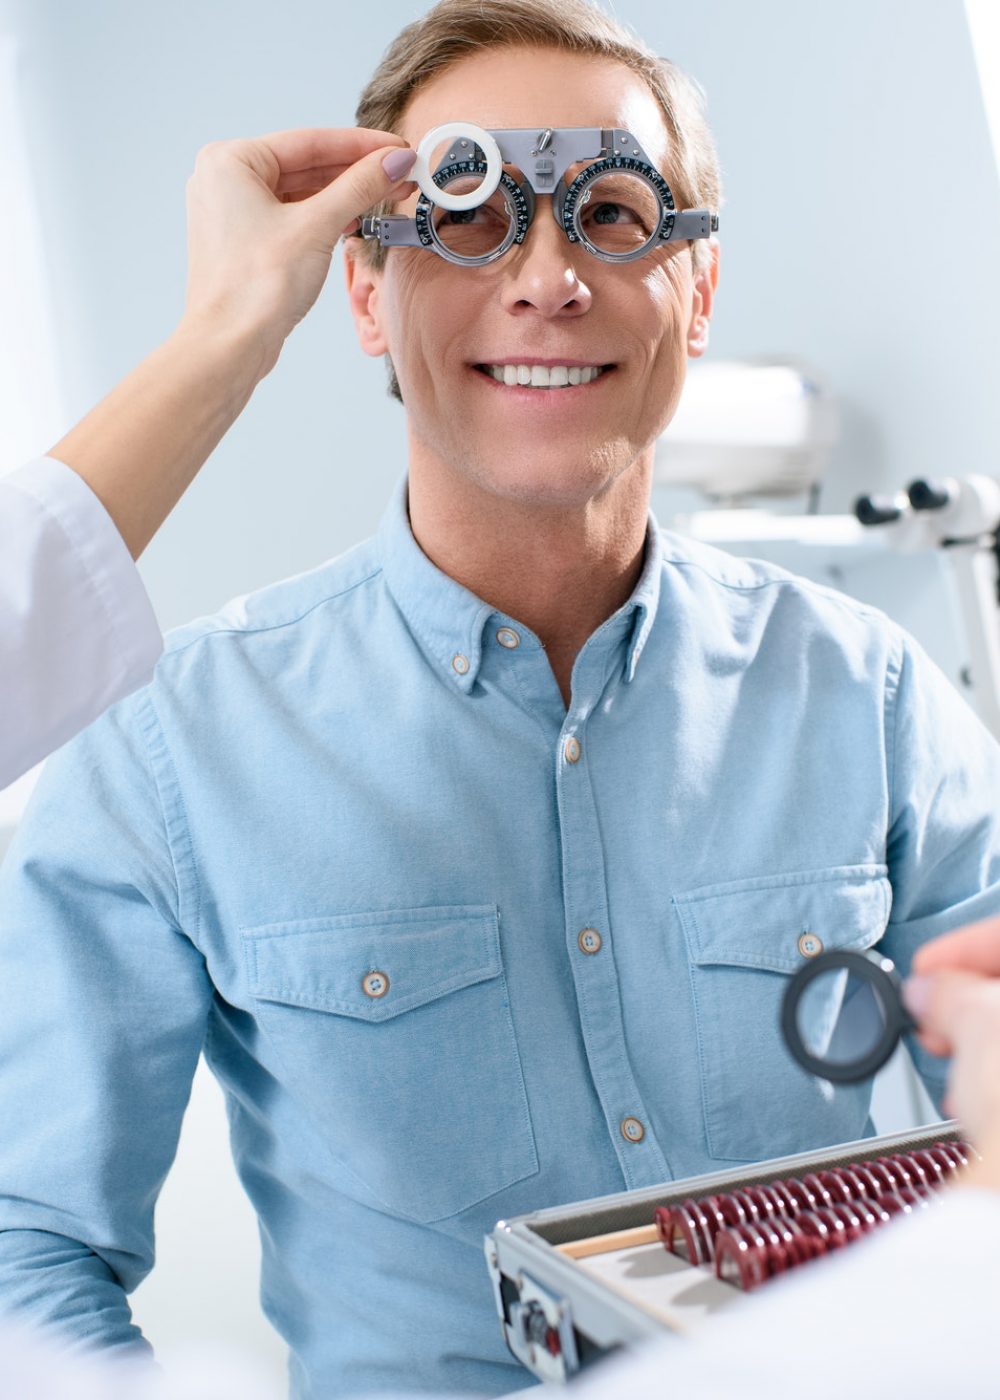 ophthalmologist-examining-middle-aged-man-eyes-with-trial-frame-and-lenses.jpg